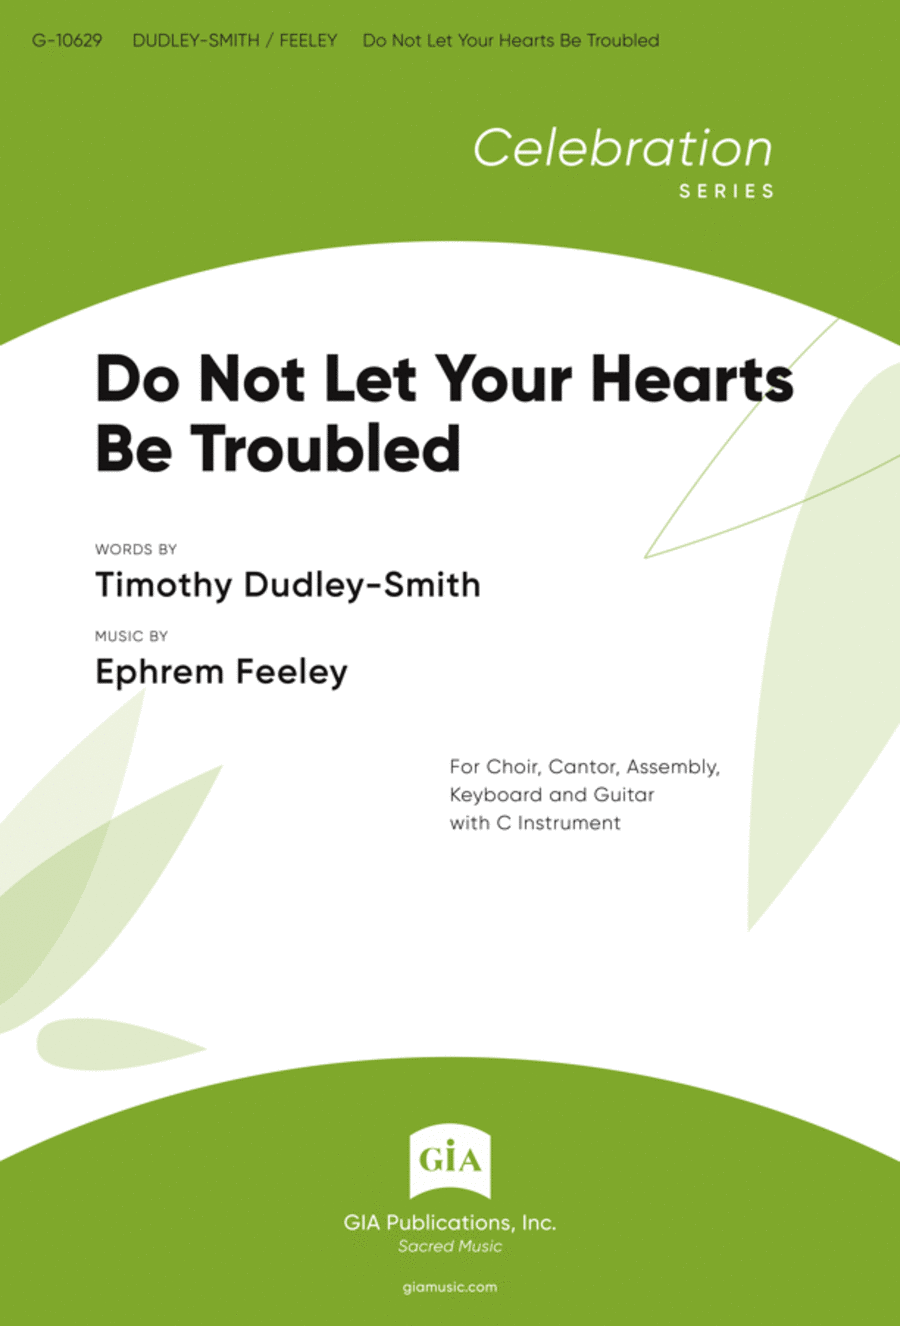 Do Not Let Your Hearts Be Troubled - Guitar edition